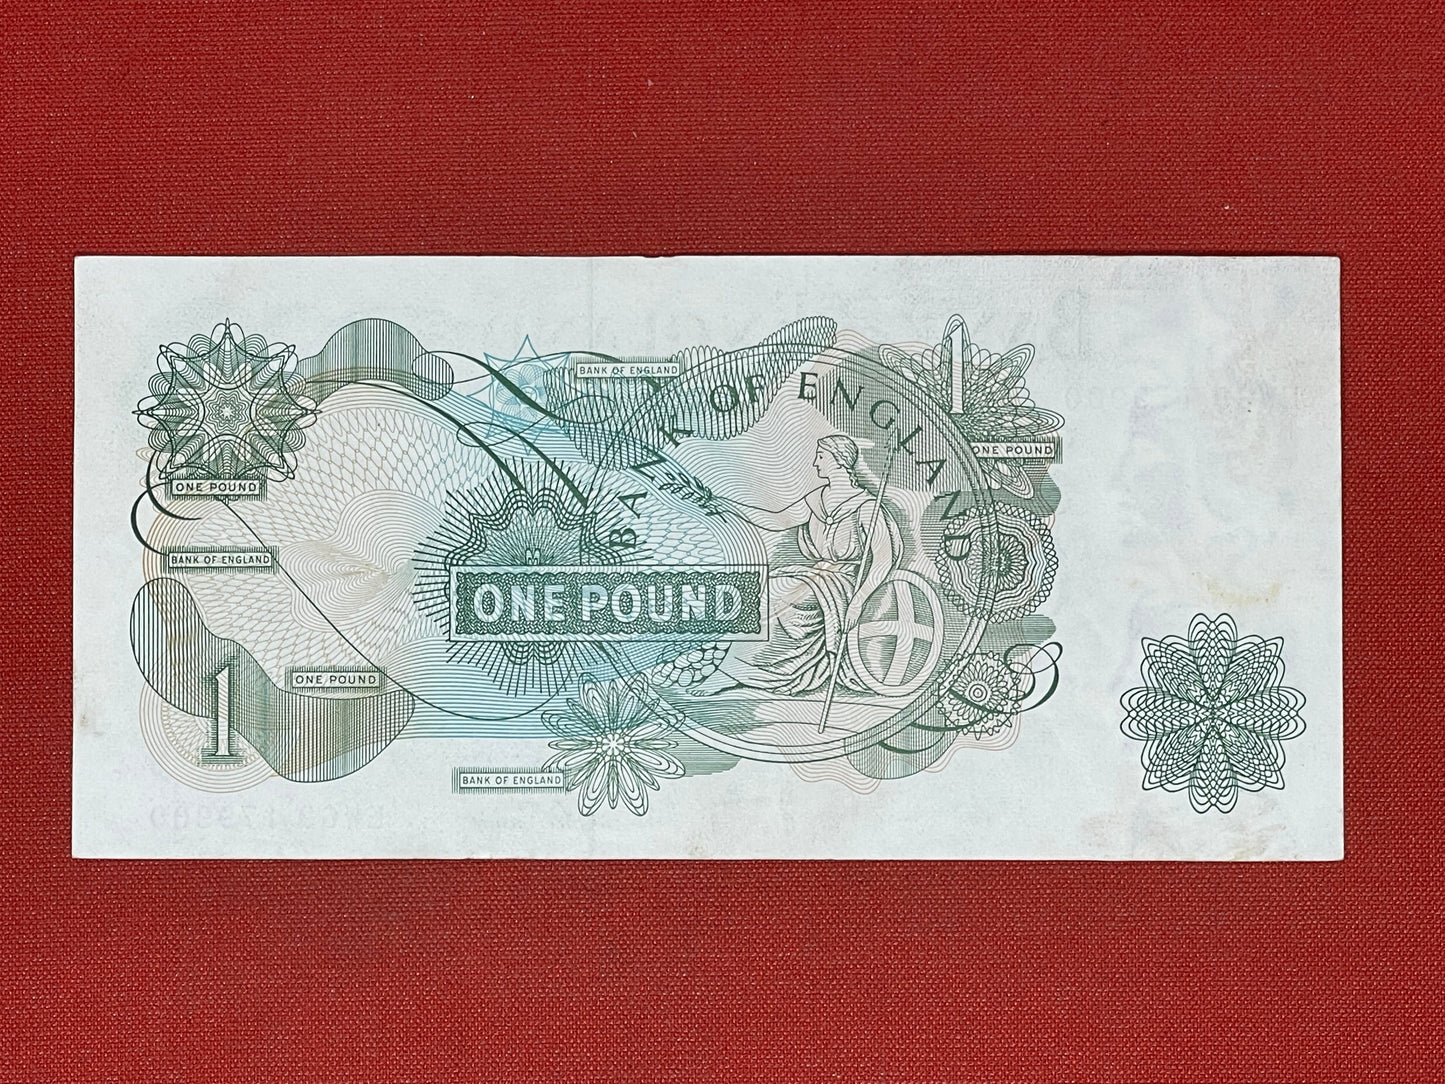 Bank of England £1 Banknote Signed J Page 1970 - 1980 ( Dugg B322 )